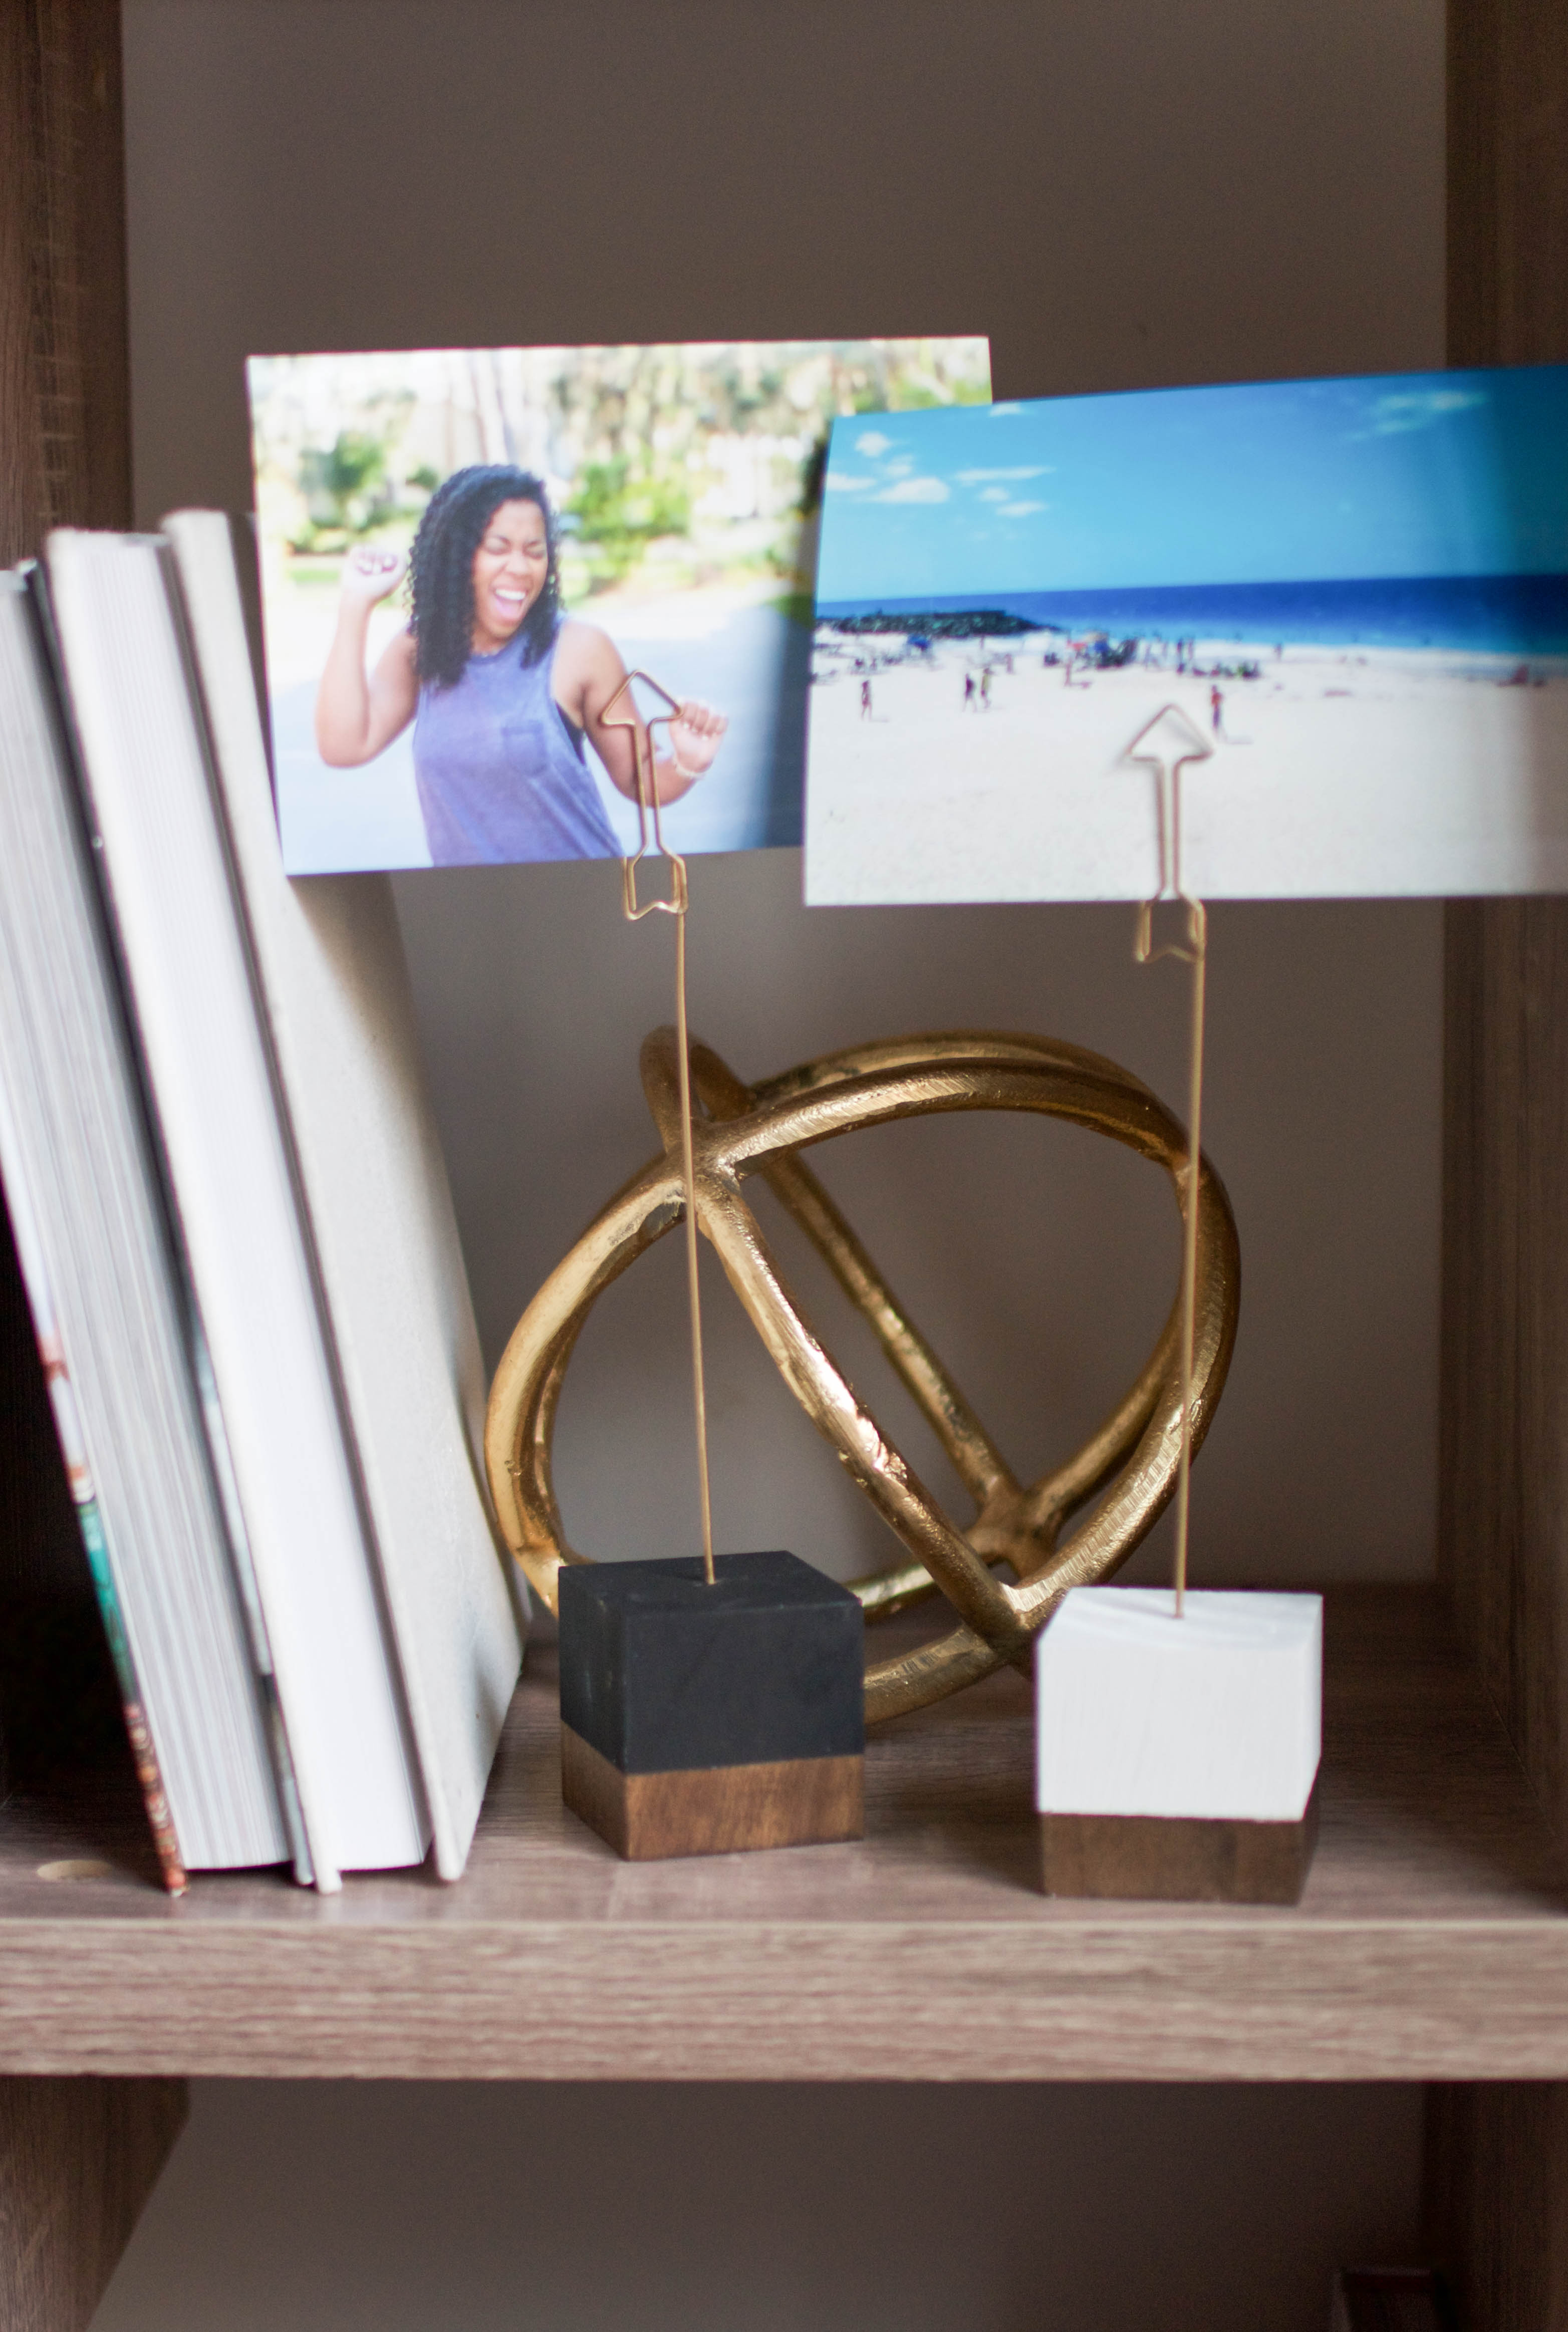 Wooden Ball Photo Holder DIY (Only Takes 5 Minutes To Make!) - A